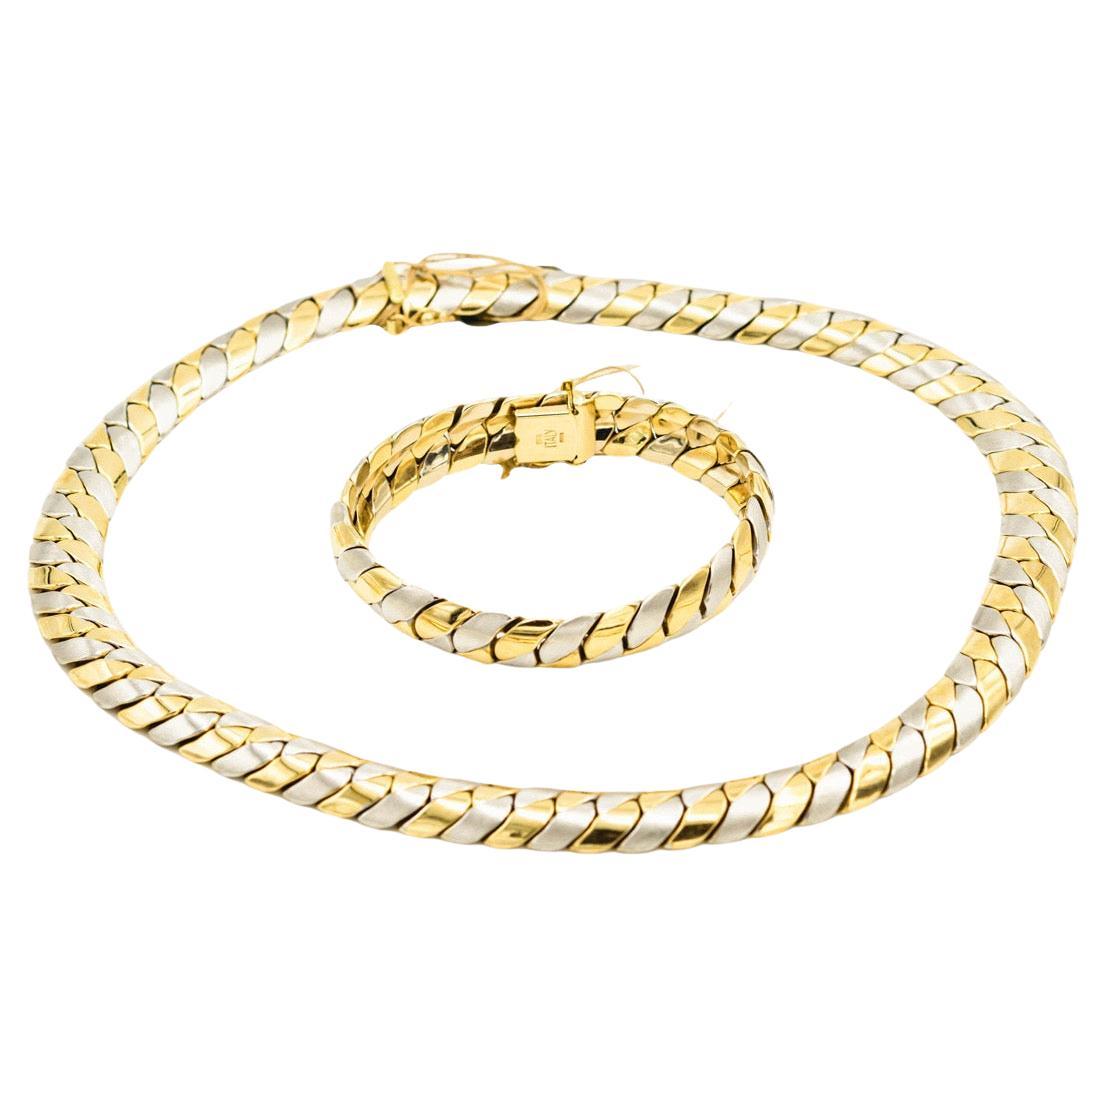 Two Tone Yellow and White Gold Italian Braid Necklace & Bracelet Suite For Sale